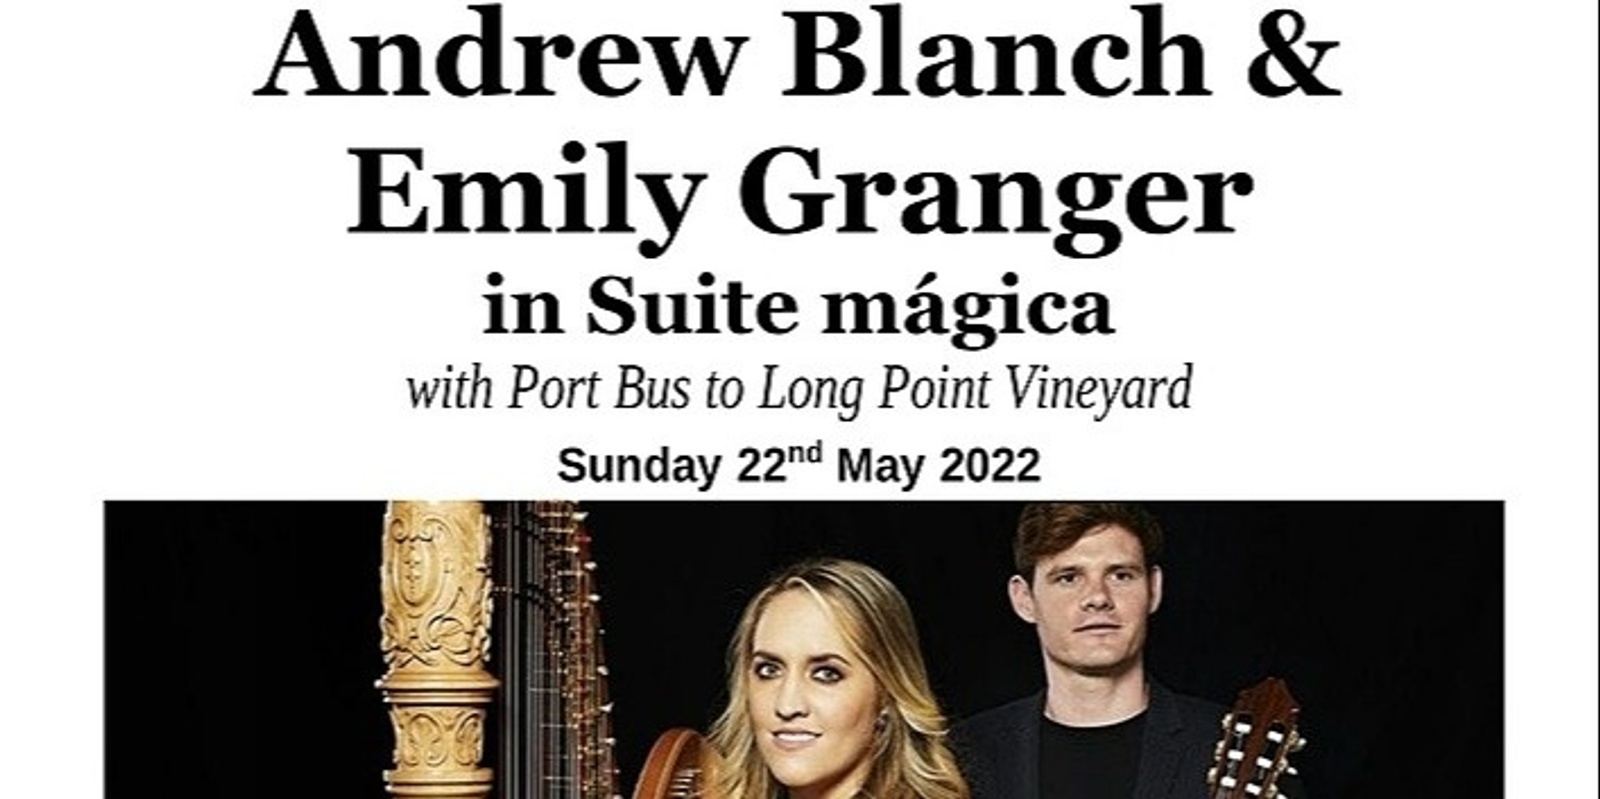 Banner image for Andrew Blanch & Emily Granger in Suite mágica